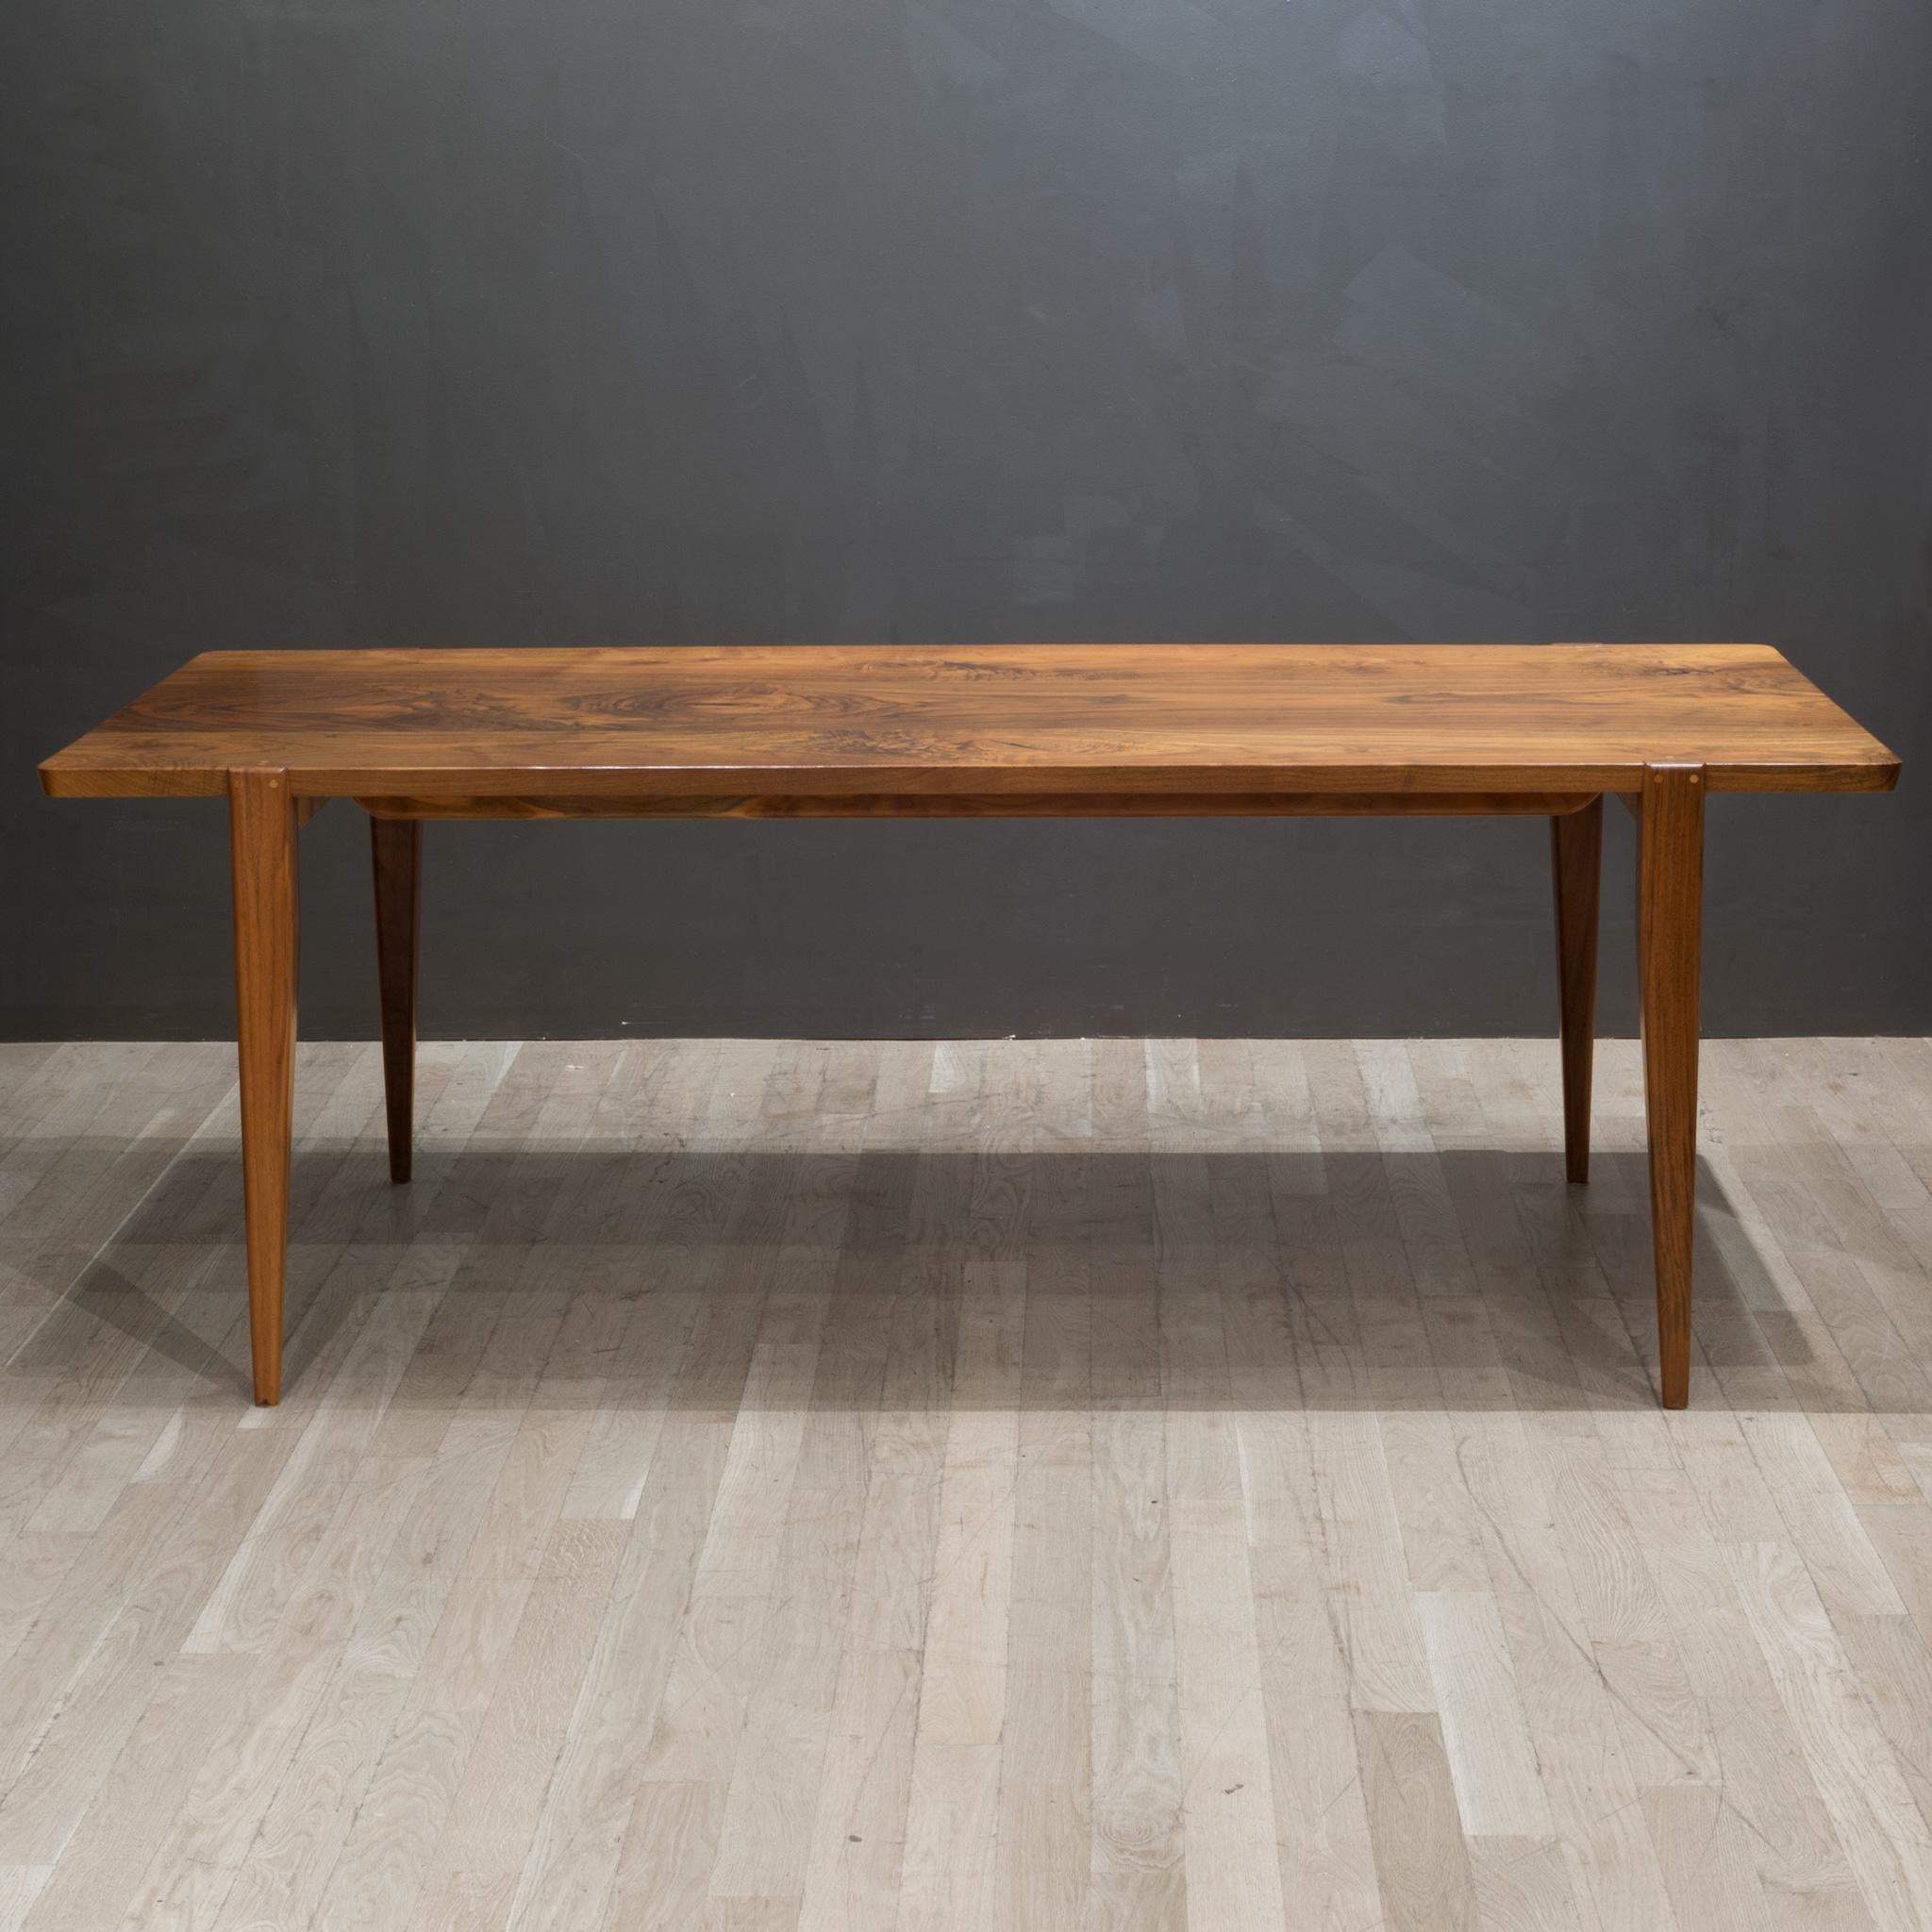 Contemporary Hand Crafted Solid Black Walnut Dining Table C.2018